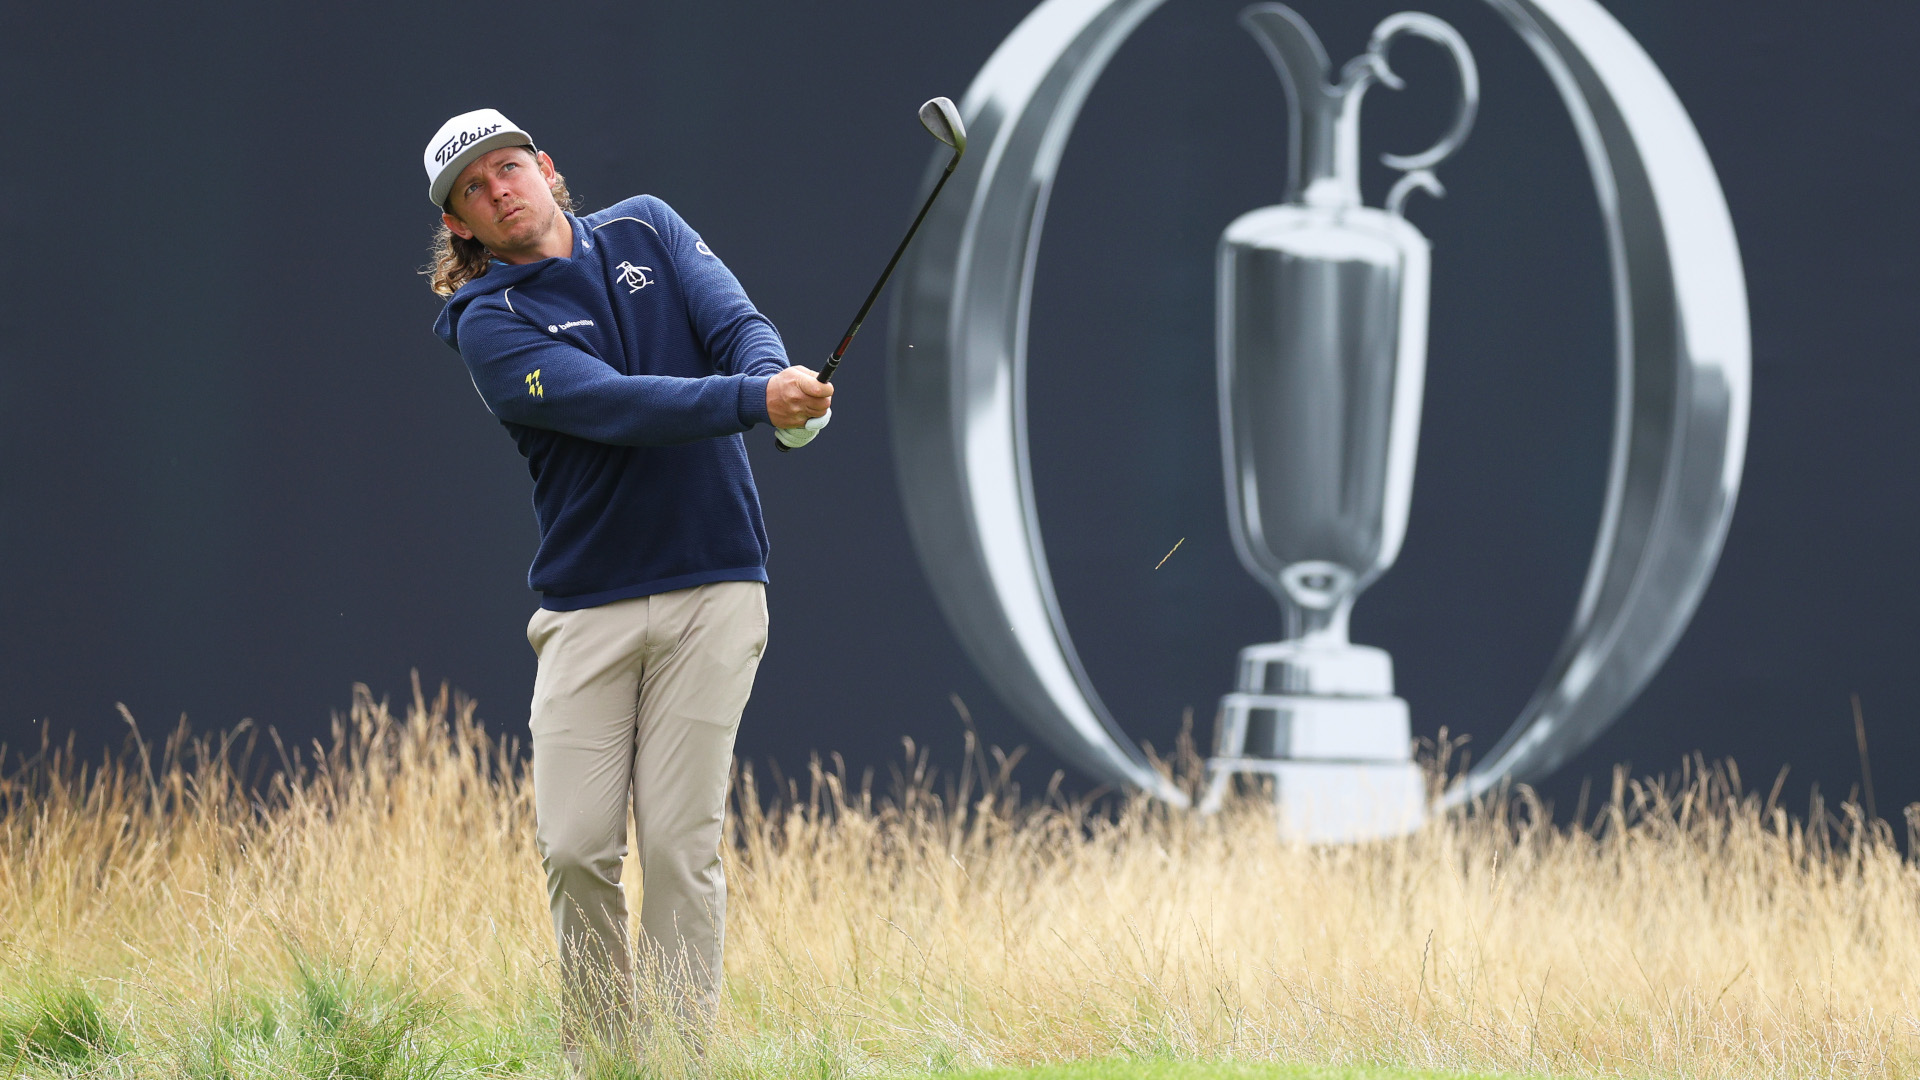 Watch The Open Championship 2023 live stream the golf from Royal Liverpool online — tee times, schedules Toms Guide